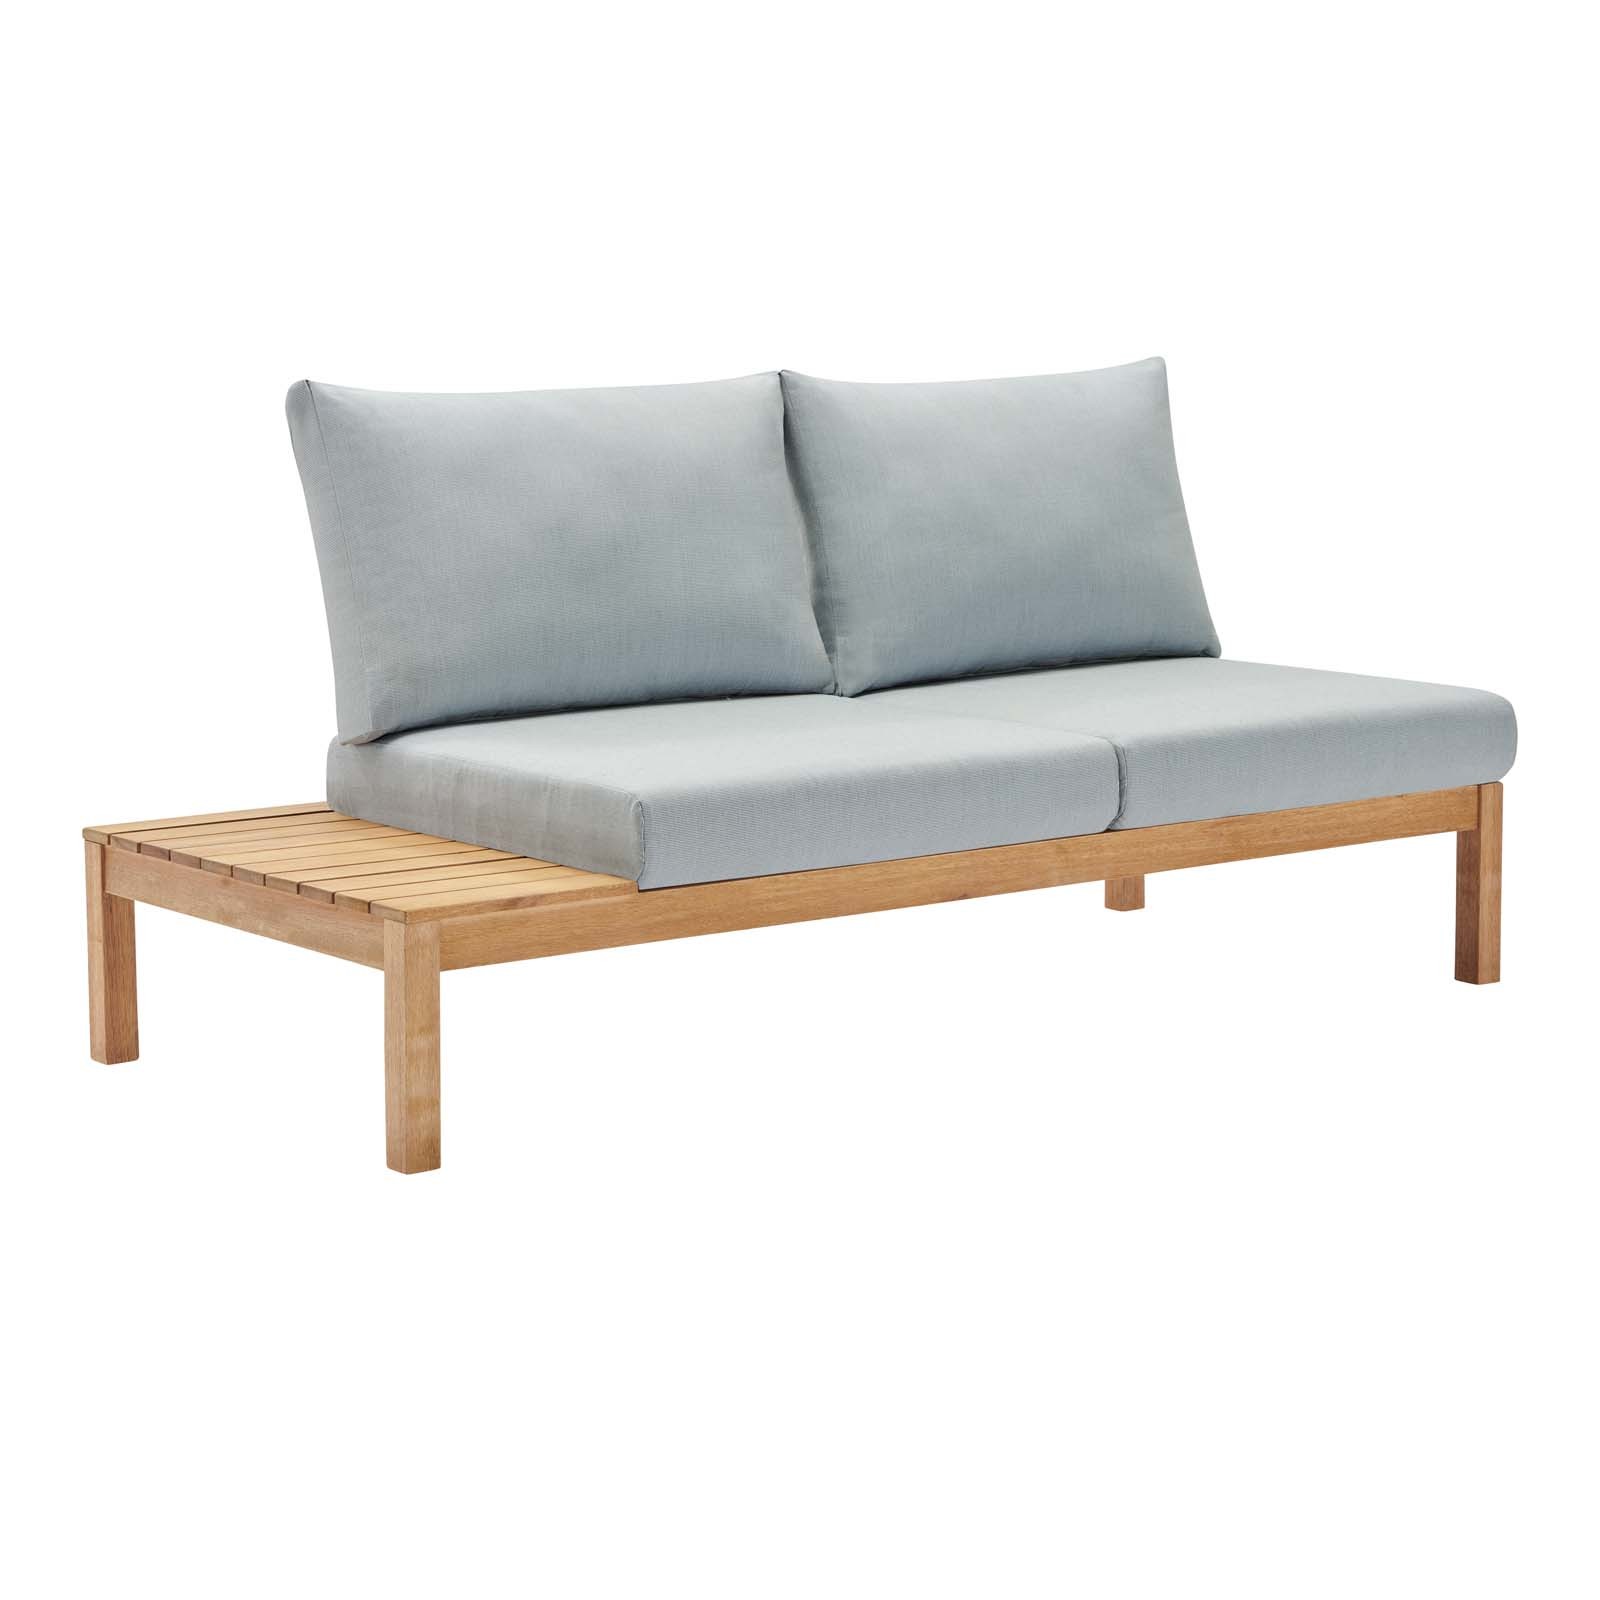 Freeport Karri Wood Outdoor Patio Loveseat with Left-Facing Side End Table in Natural Light Blue